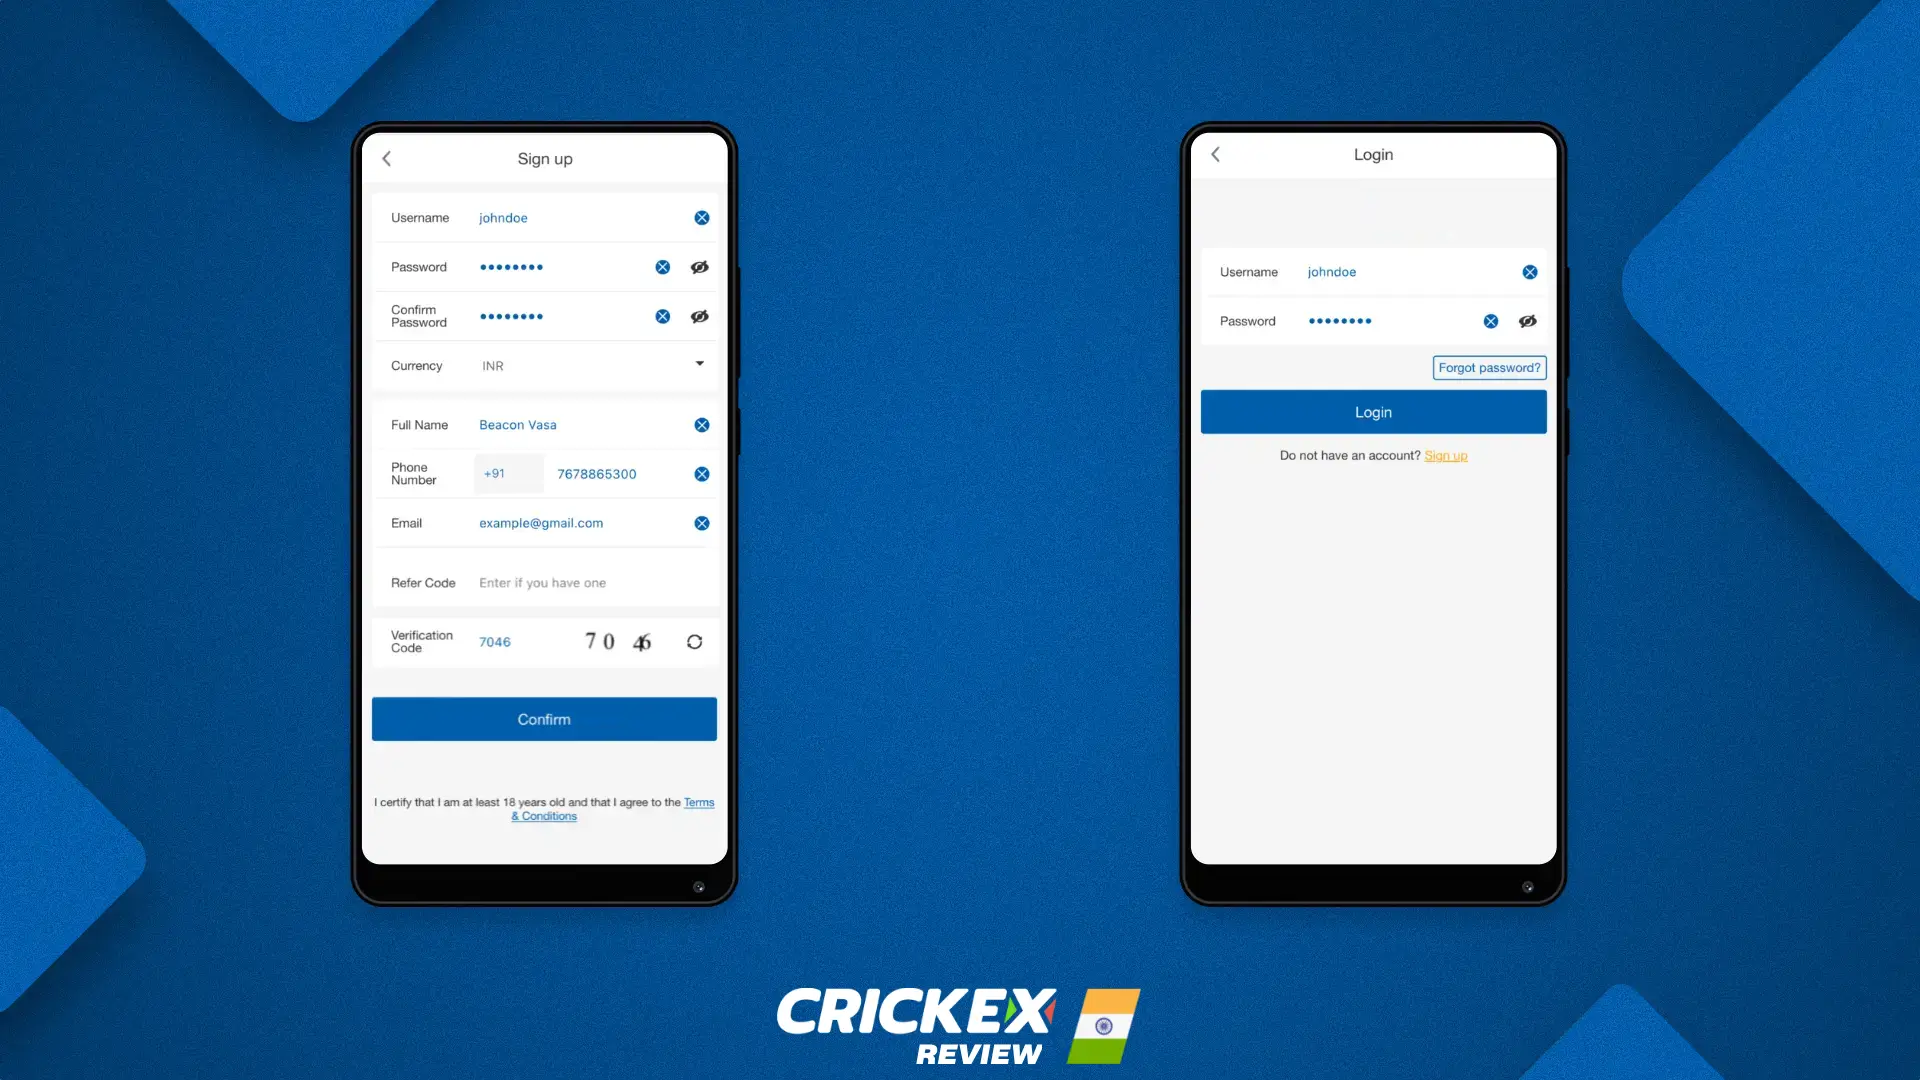 Create an account to get access to all the features of the Crickex app